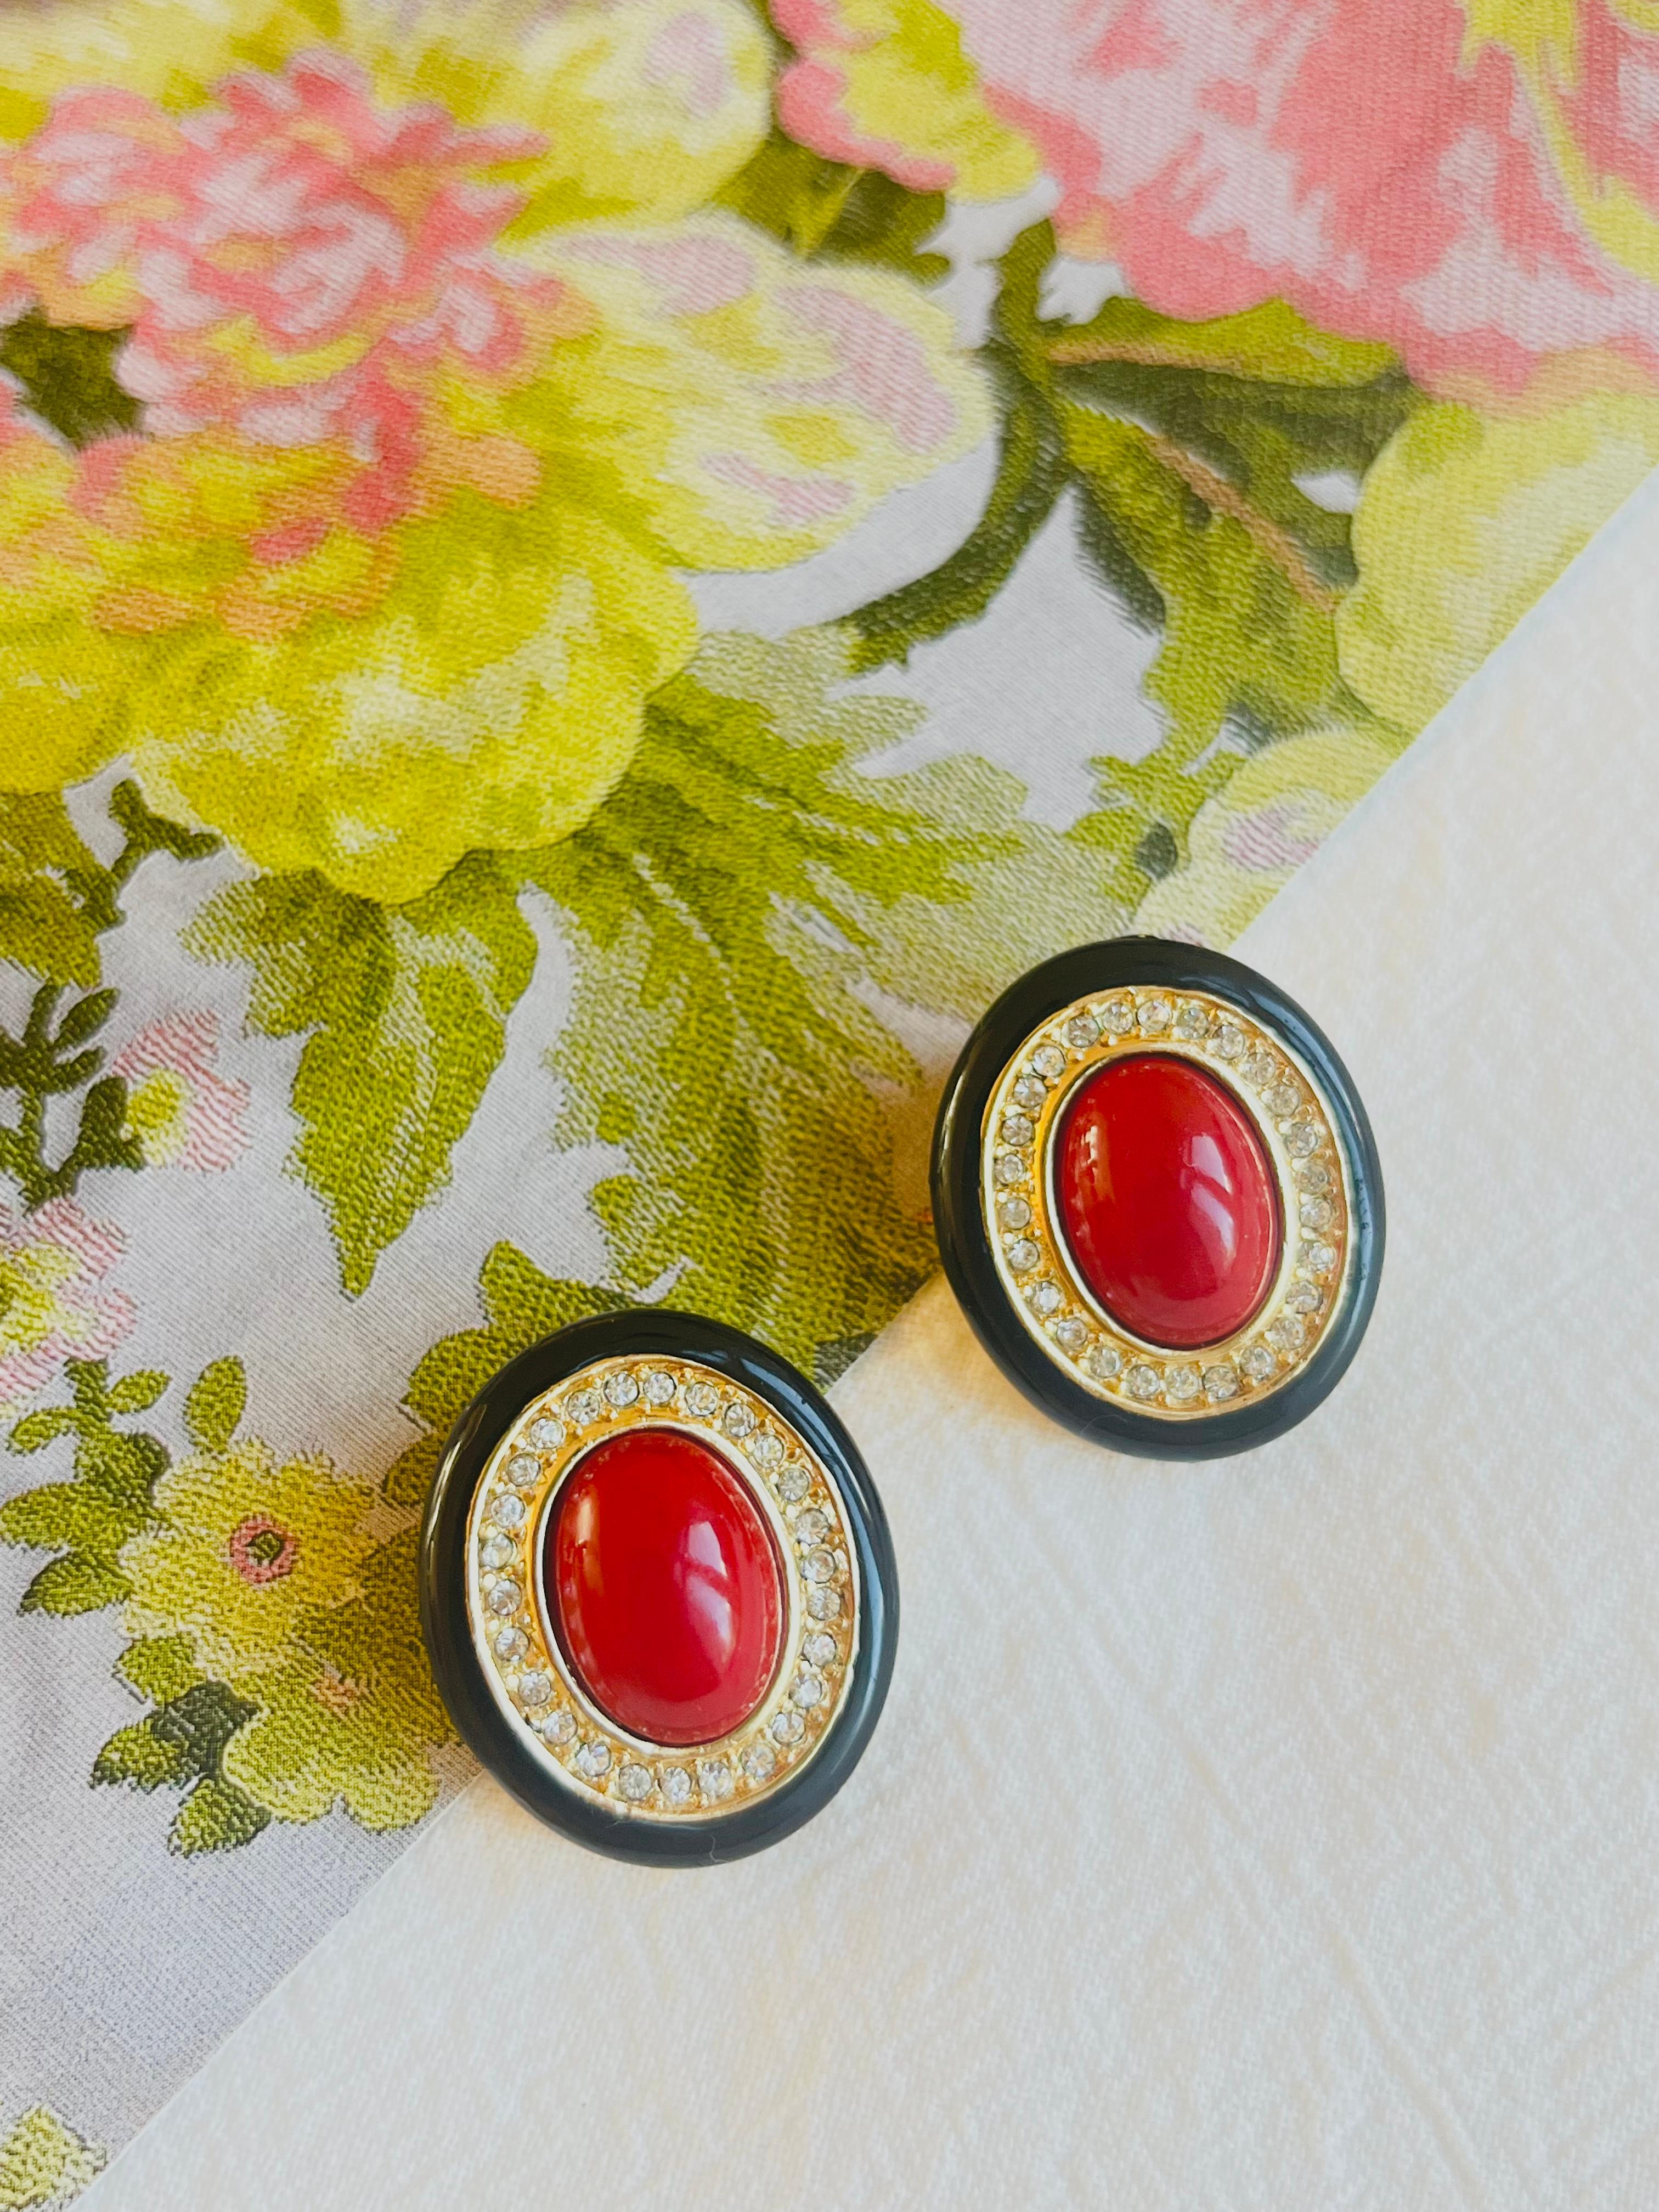 Christian Dior GROSSE 1970s Large Red Oval Pearl Crystals Black Clip Earrings, Gold Tone

Very excellent condition. Vintage and rare to find. 100% Genuine.

A very beautiful pair of clip on earrings by GROSSE, signed at the back.

Size: 2.6*2.2